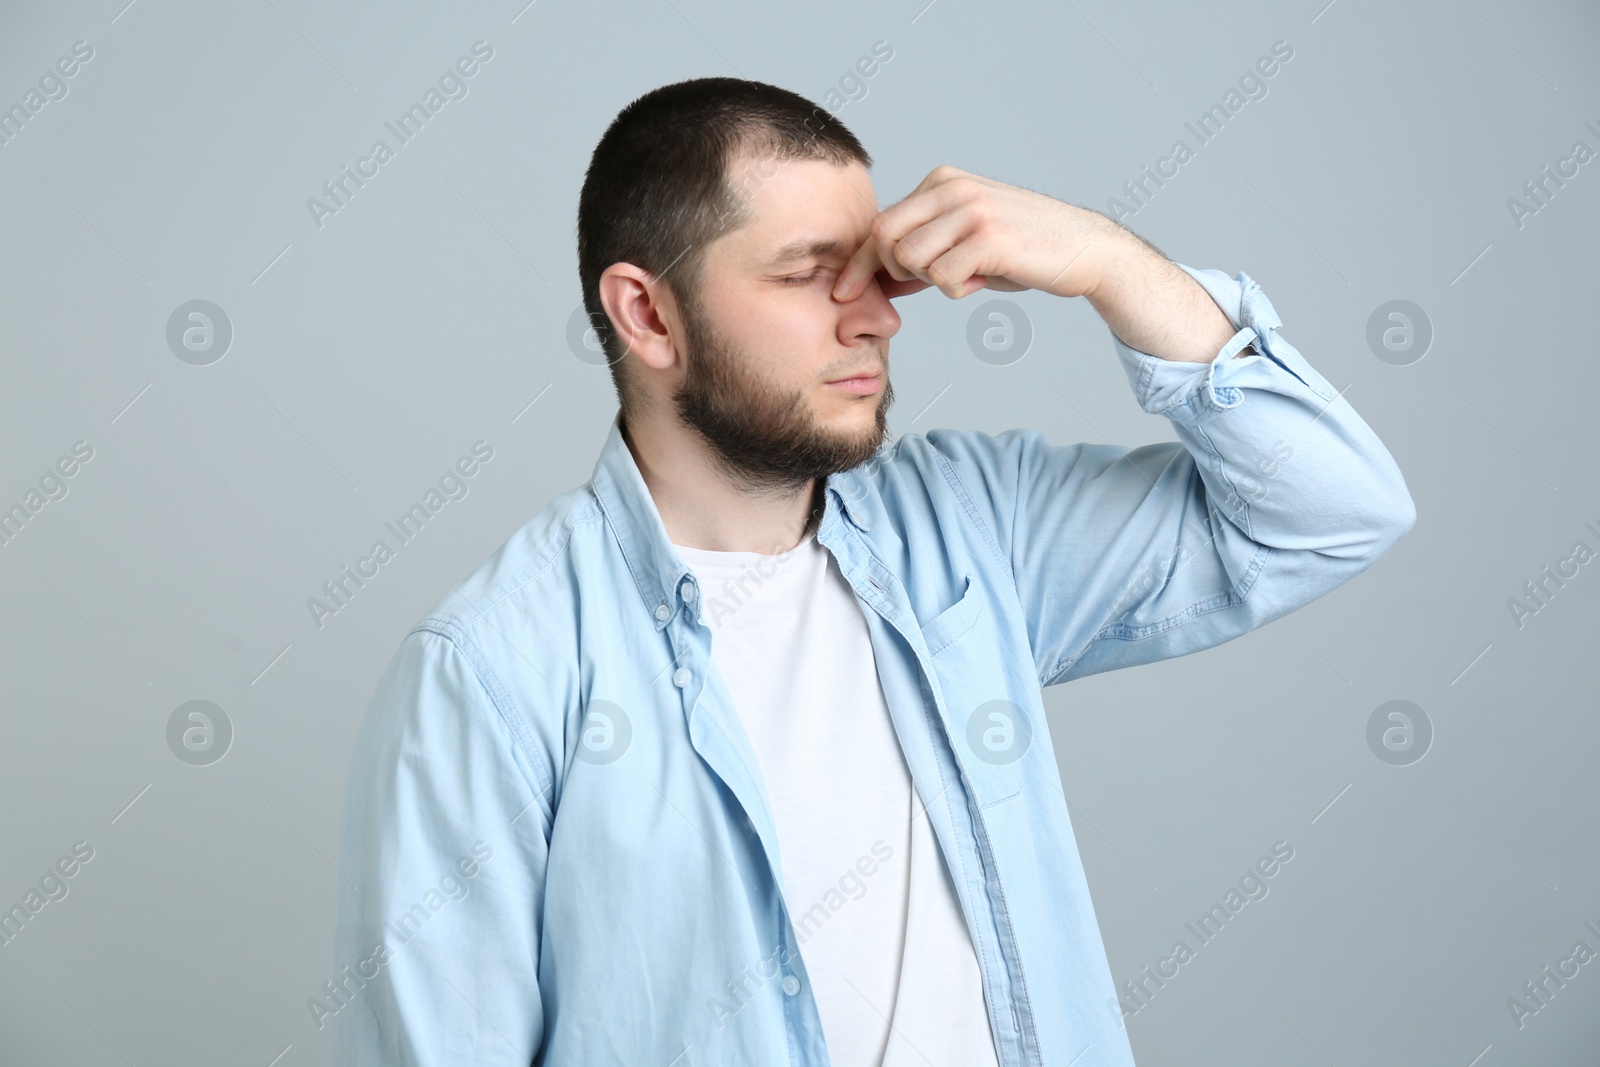 Photo of Man suffering from runny nose on light grey background